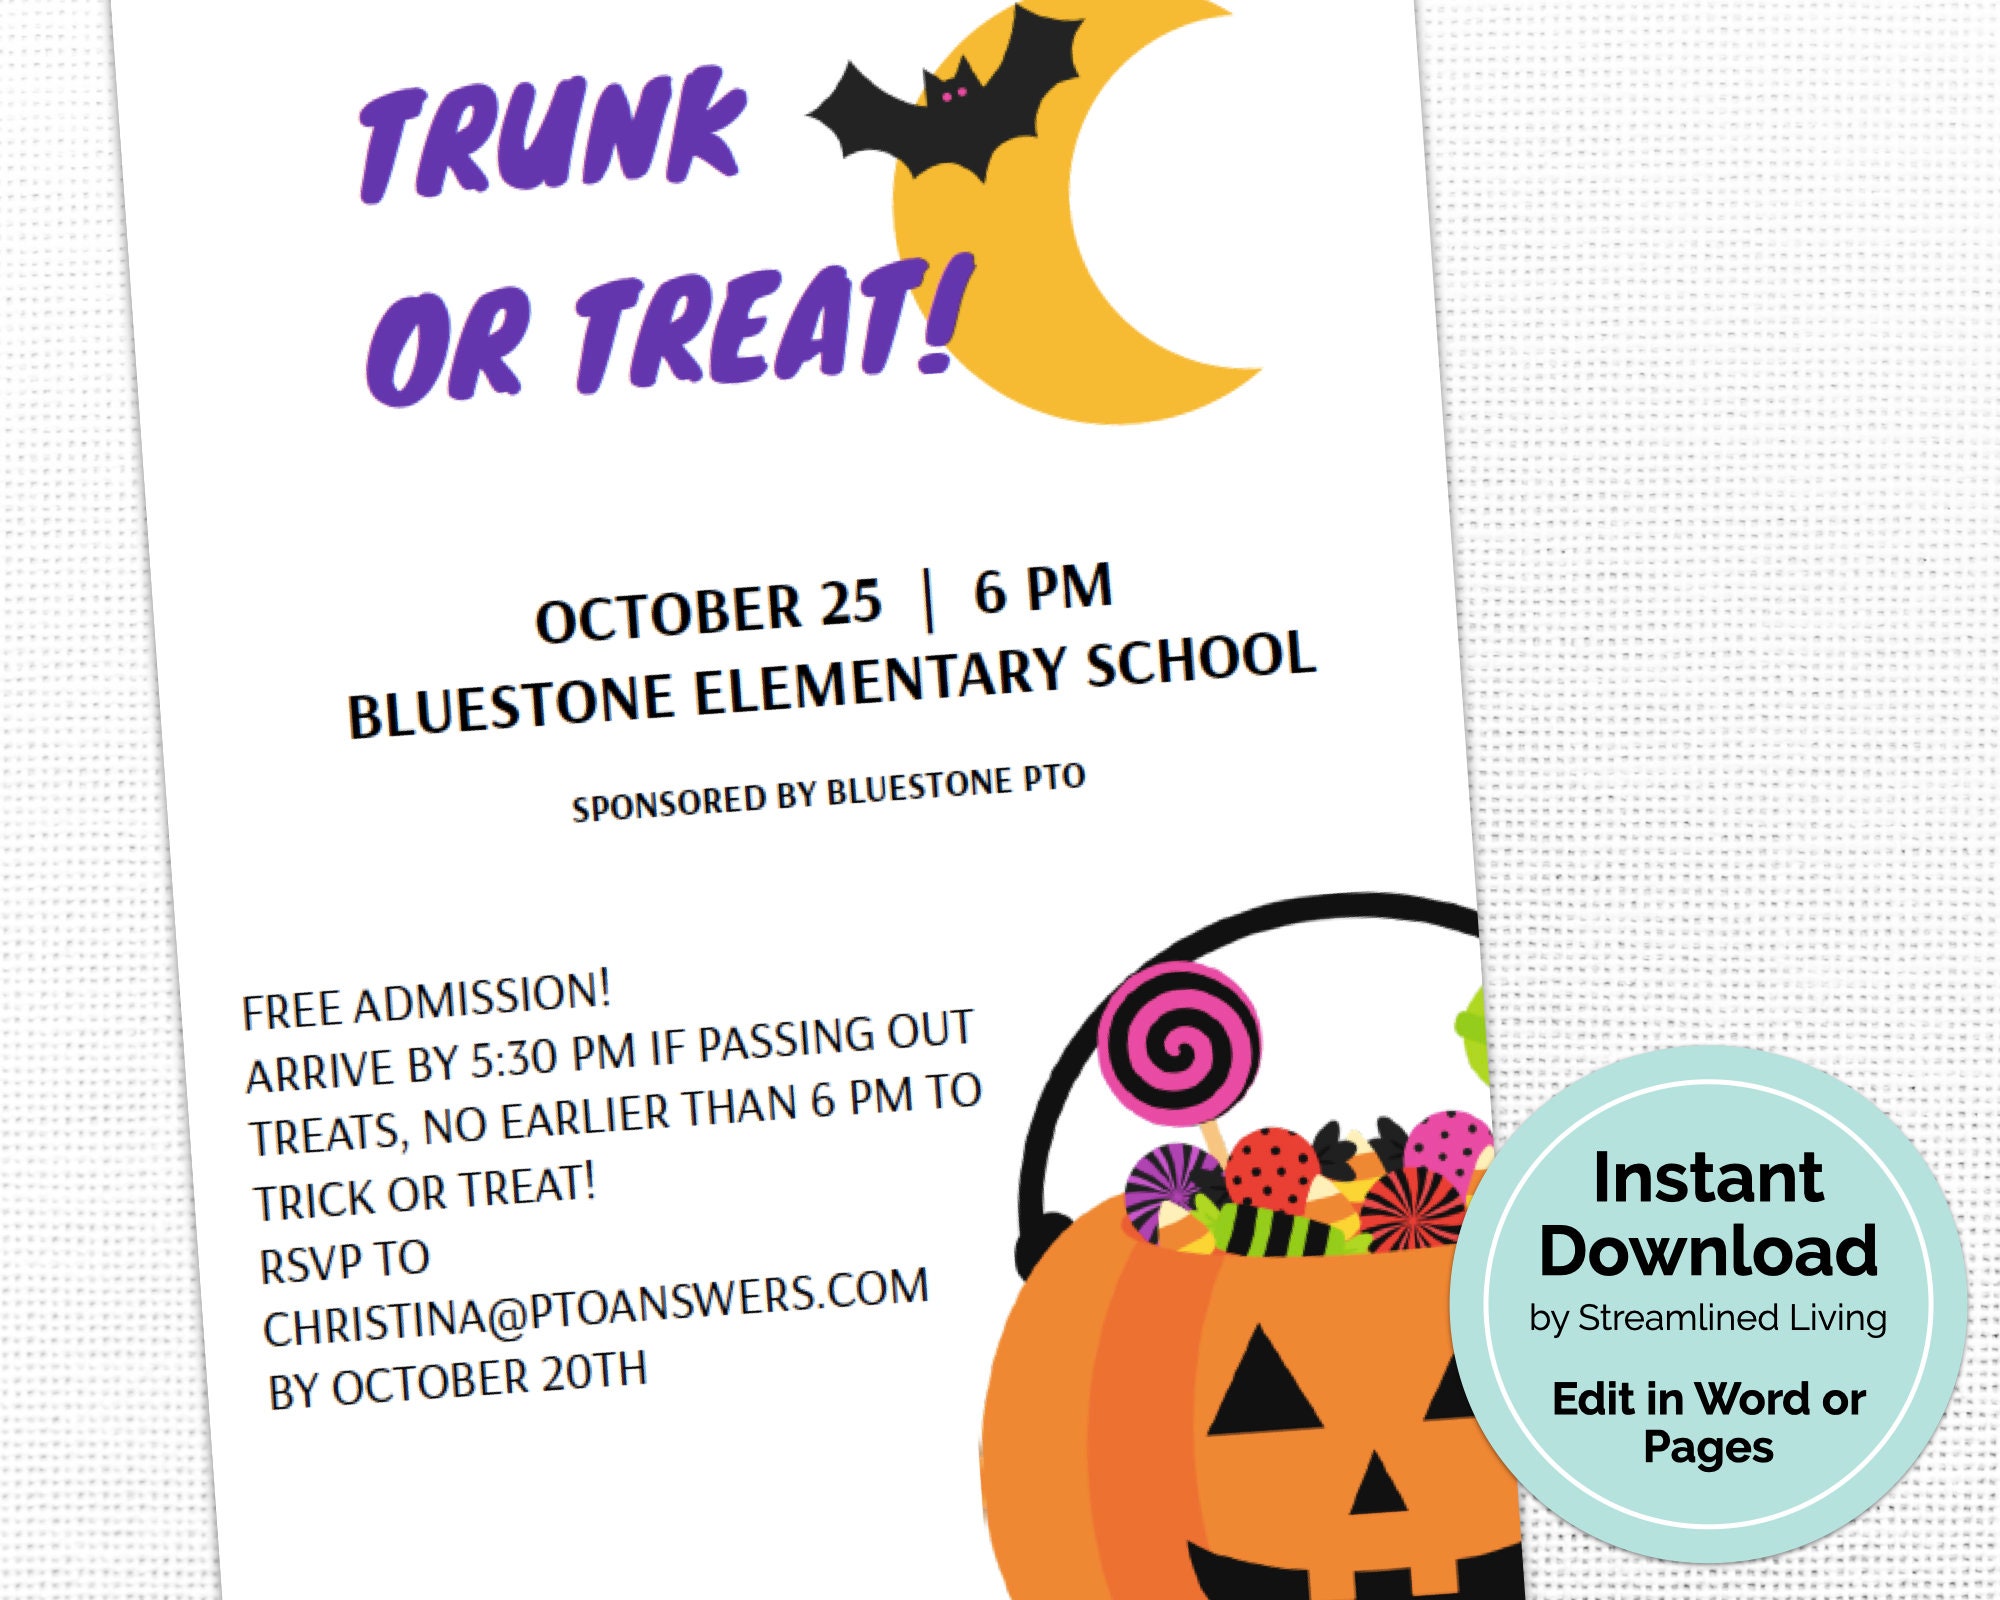 Trunk or Treat Flyer Template for PTA PTO : Halloween party event poster  for trick or treat and school community event For Trunk Or Treat Flyer Template